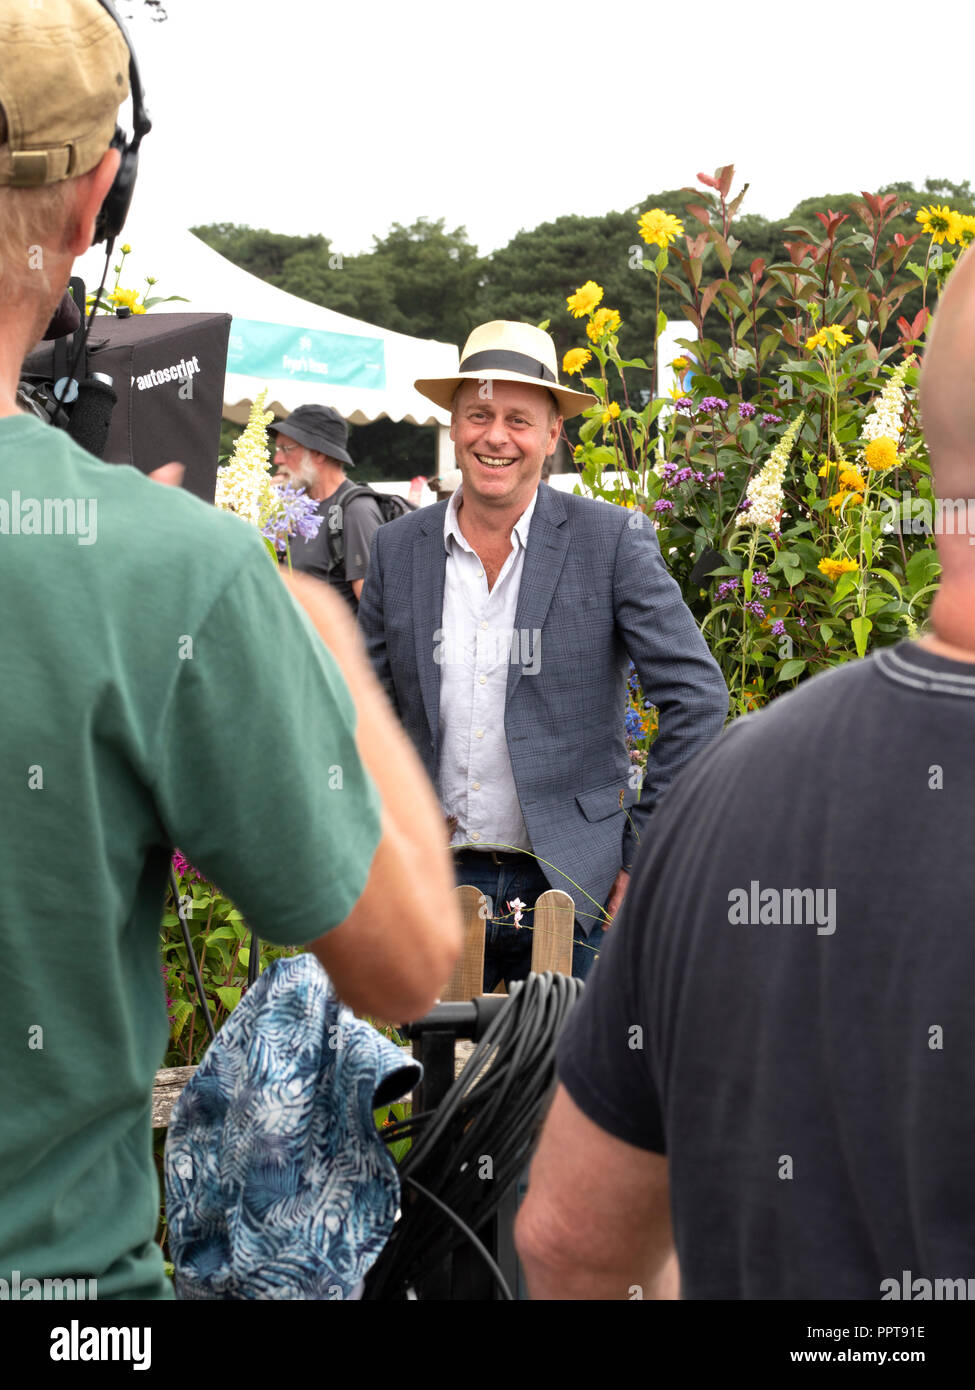 TV presenter and garden designer, Jo Swift, recording to camera for a TV show at RHS Tatton Park Flower show. Stock Photo